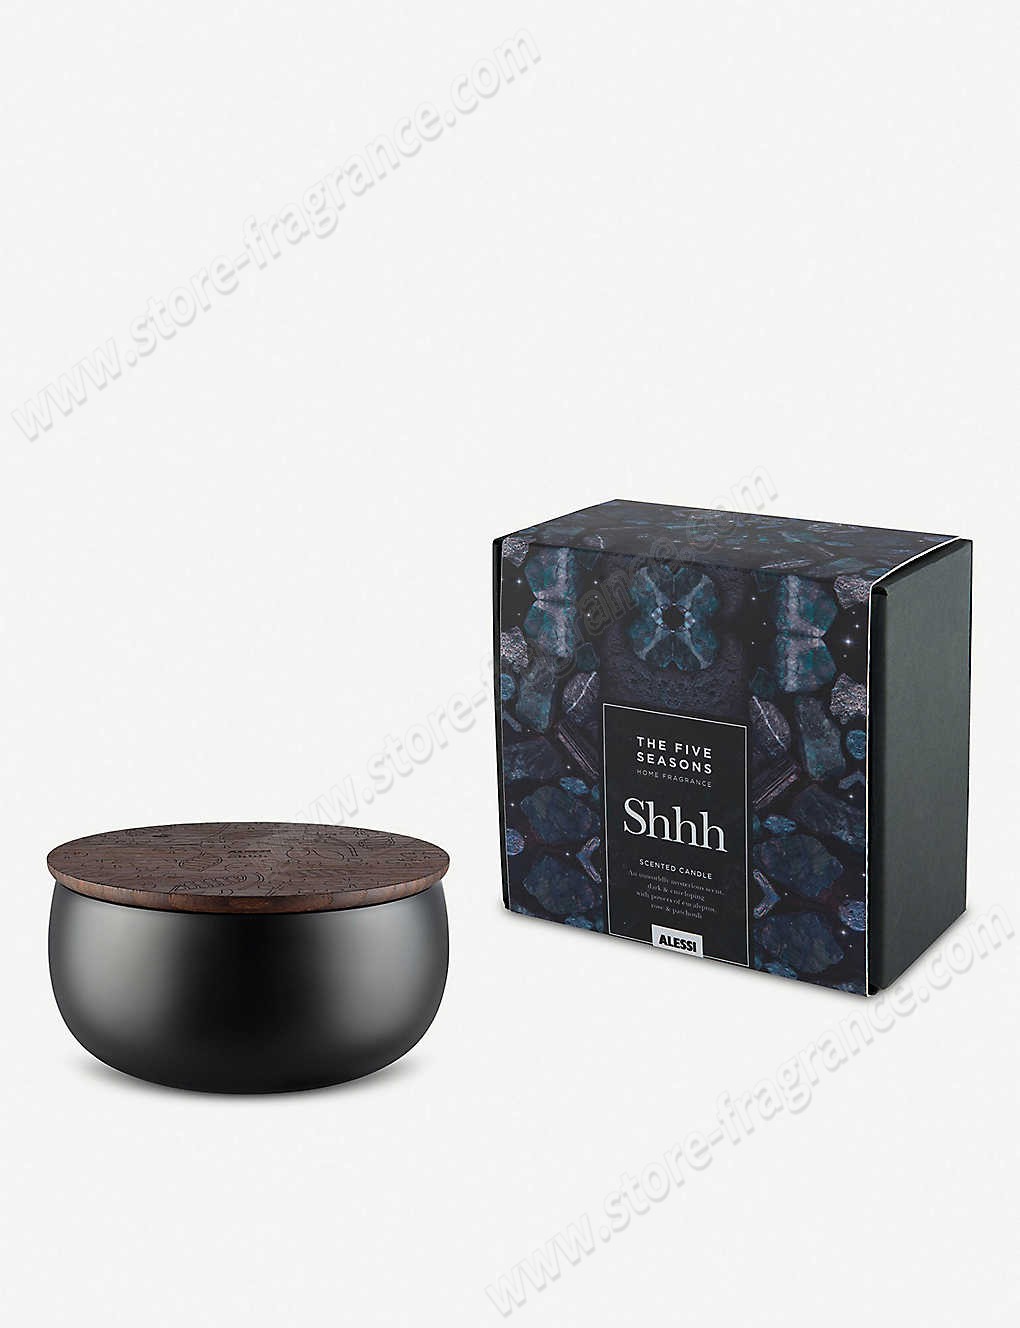 ALESSI/Five Seasons Shhh Scented candle large ✿ Discount Store - ALESSI/Five Seasons Shhh Scented candle large ✿ Discount Store